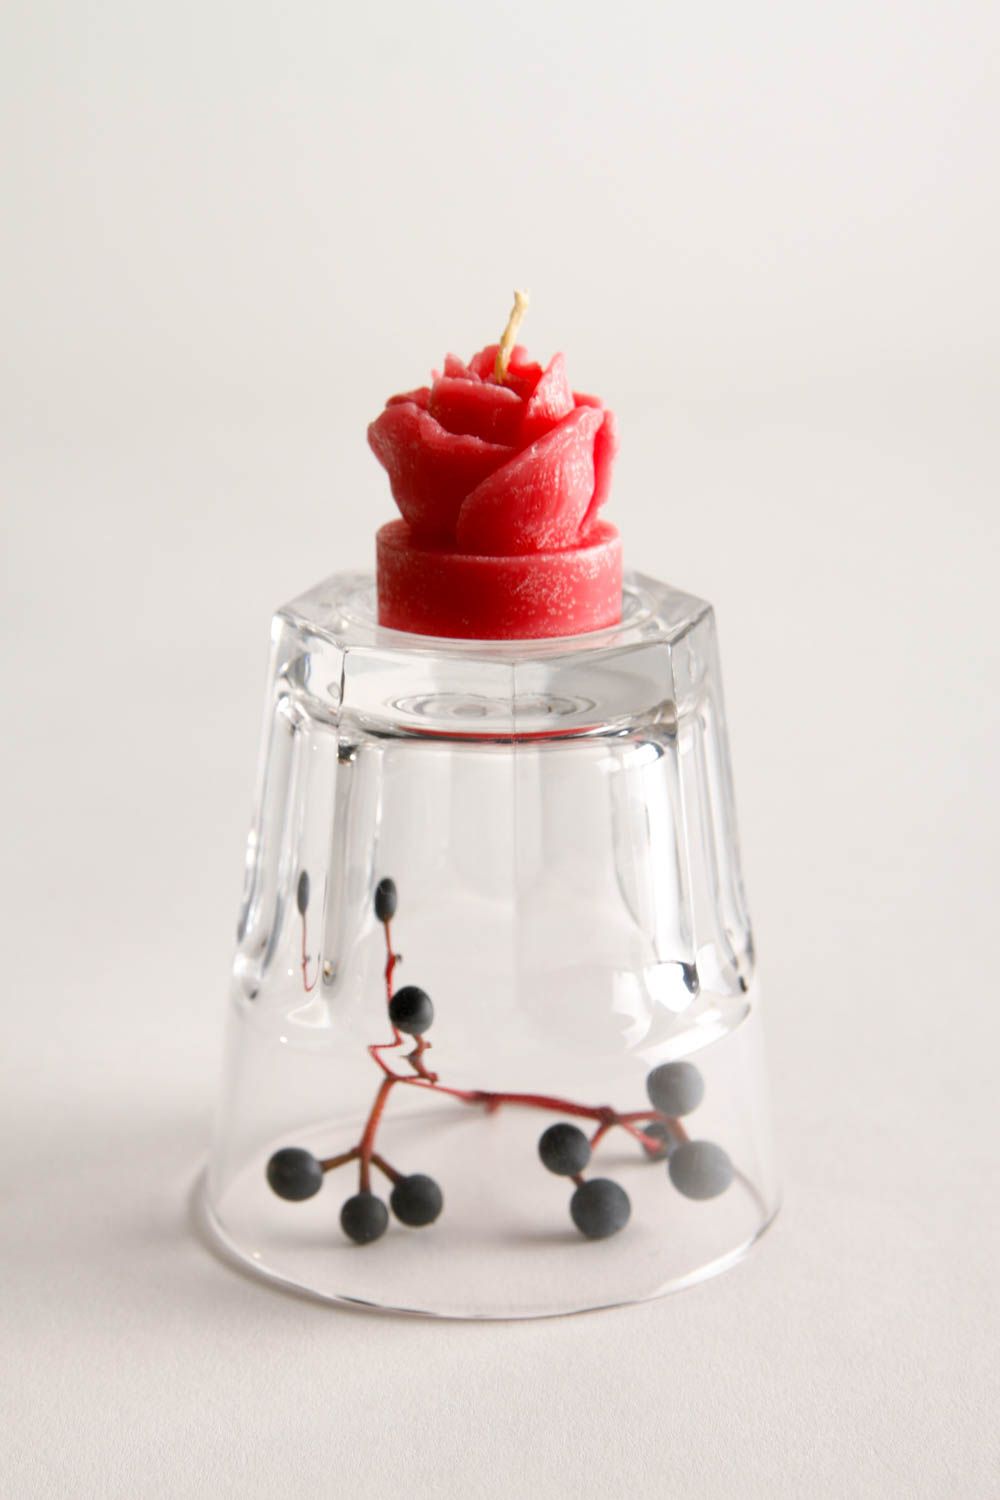 Tea light aroma candle in red rose shape with non-toxic cotton cord 1,18 inches, 0,04 lb photo 1